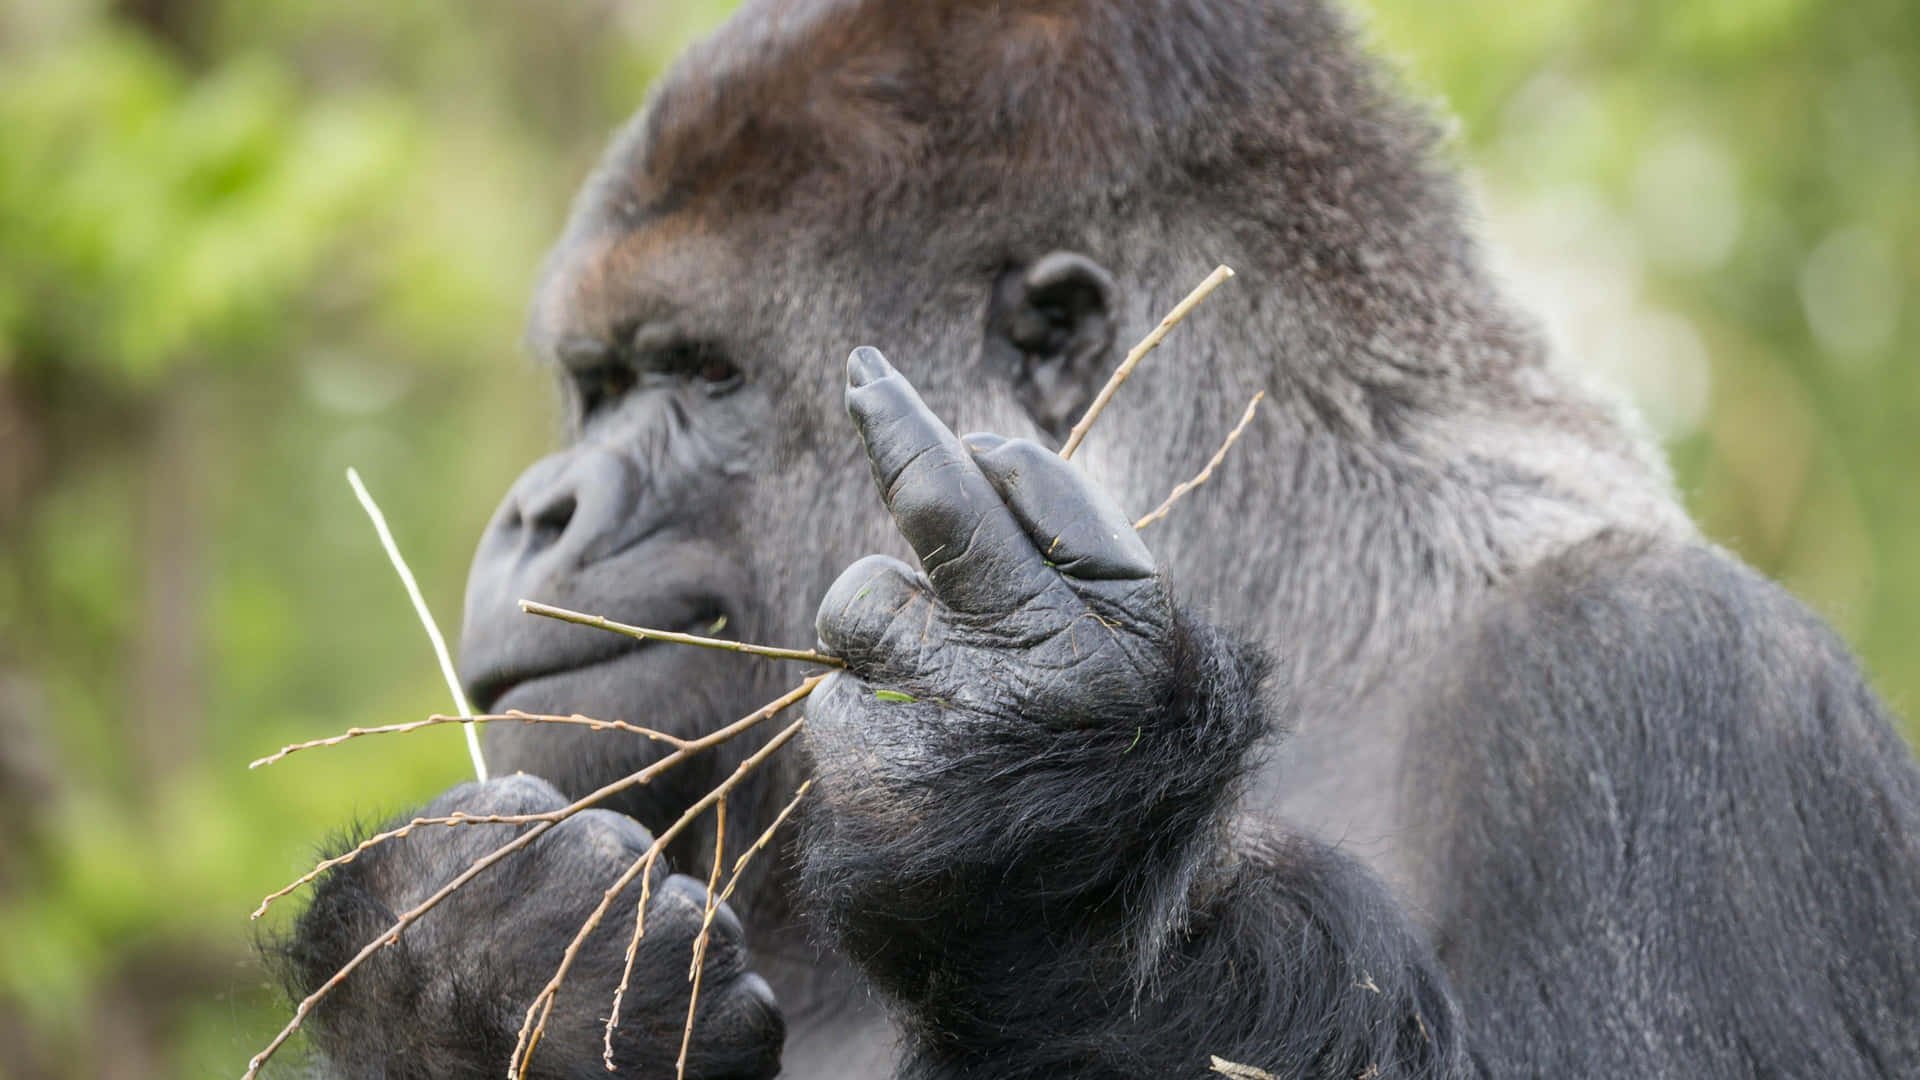 A Gorilla Is Holding A Branch In Its Hand Wallpaper